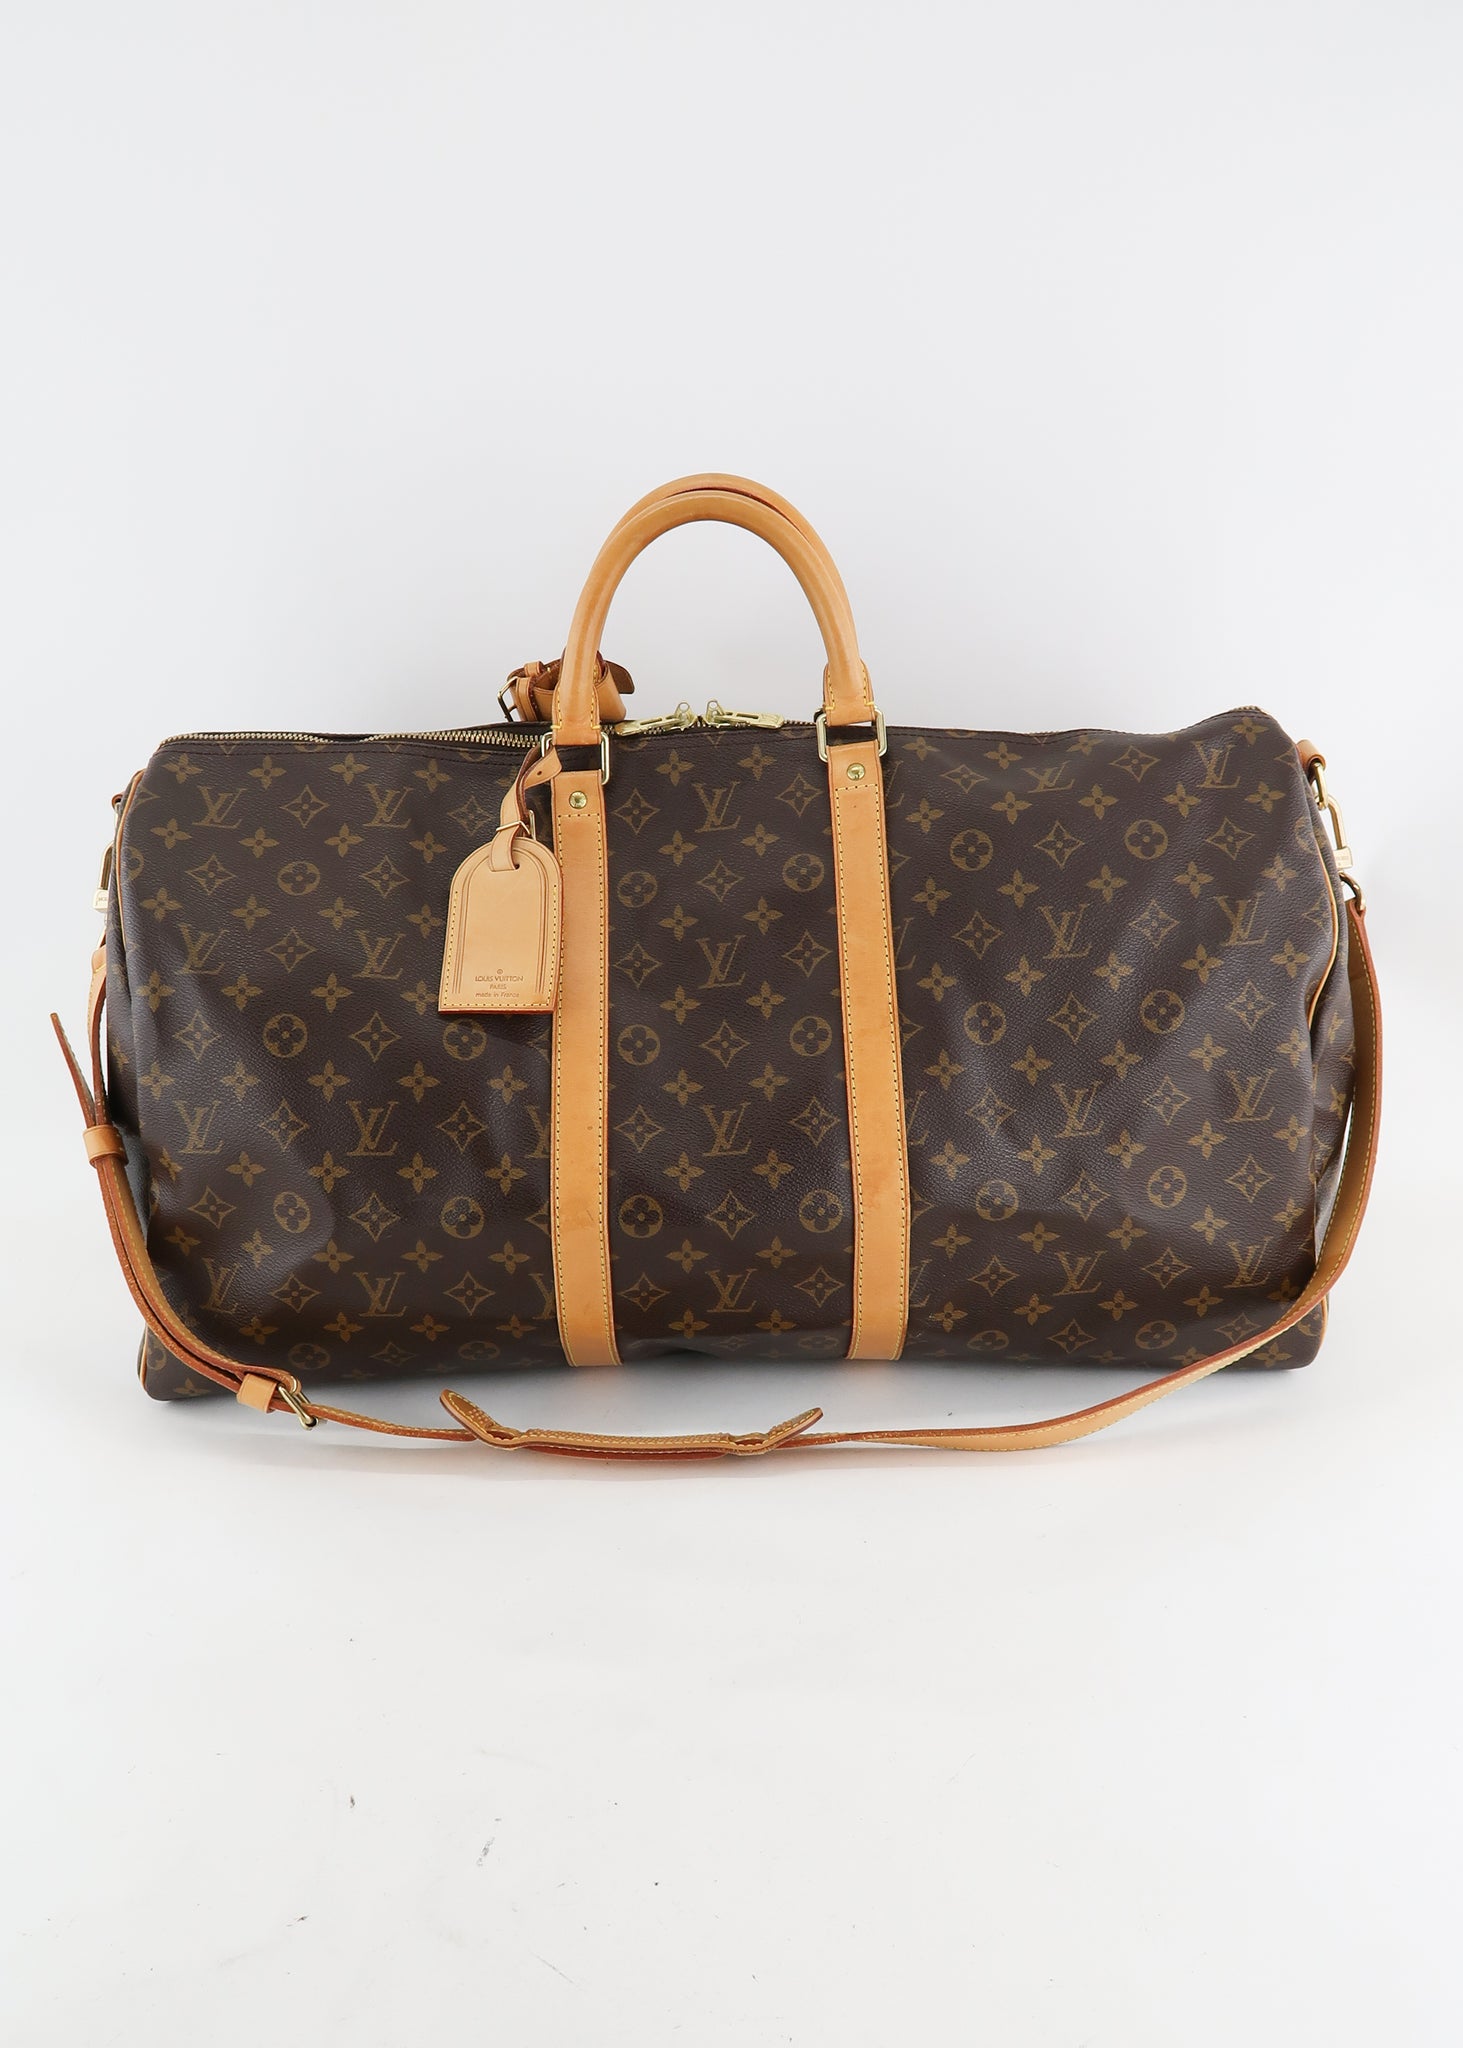 What size is your KEEPALL? 45/50/55? What's the material? Is it a